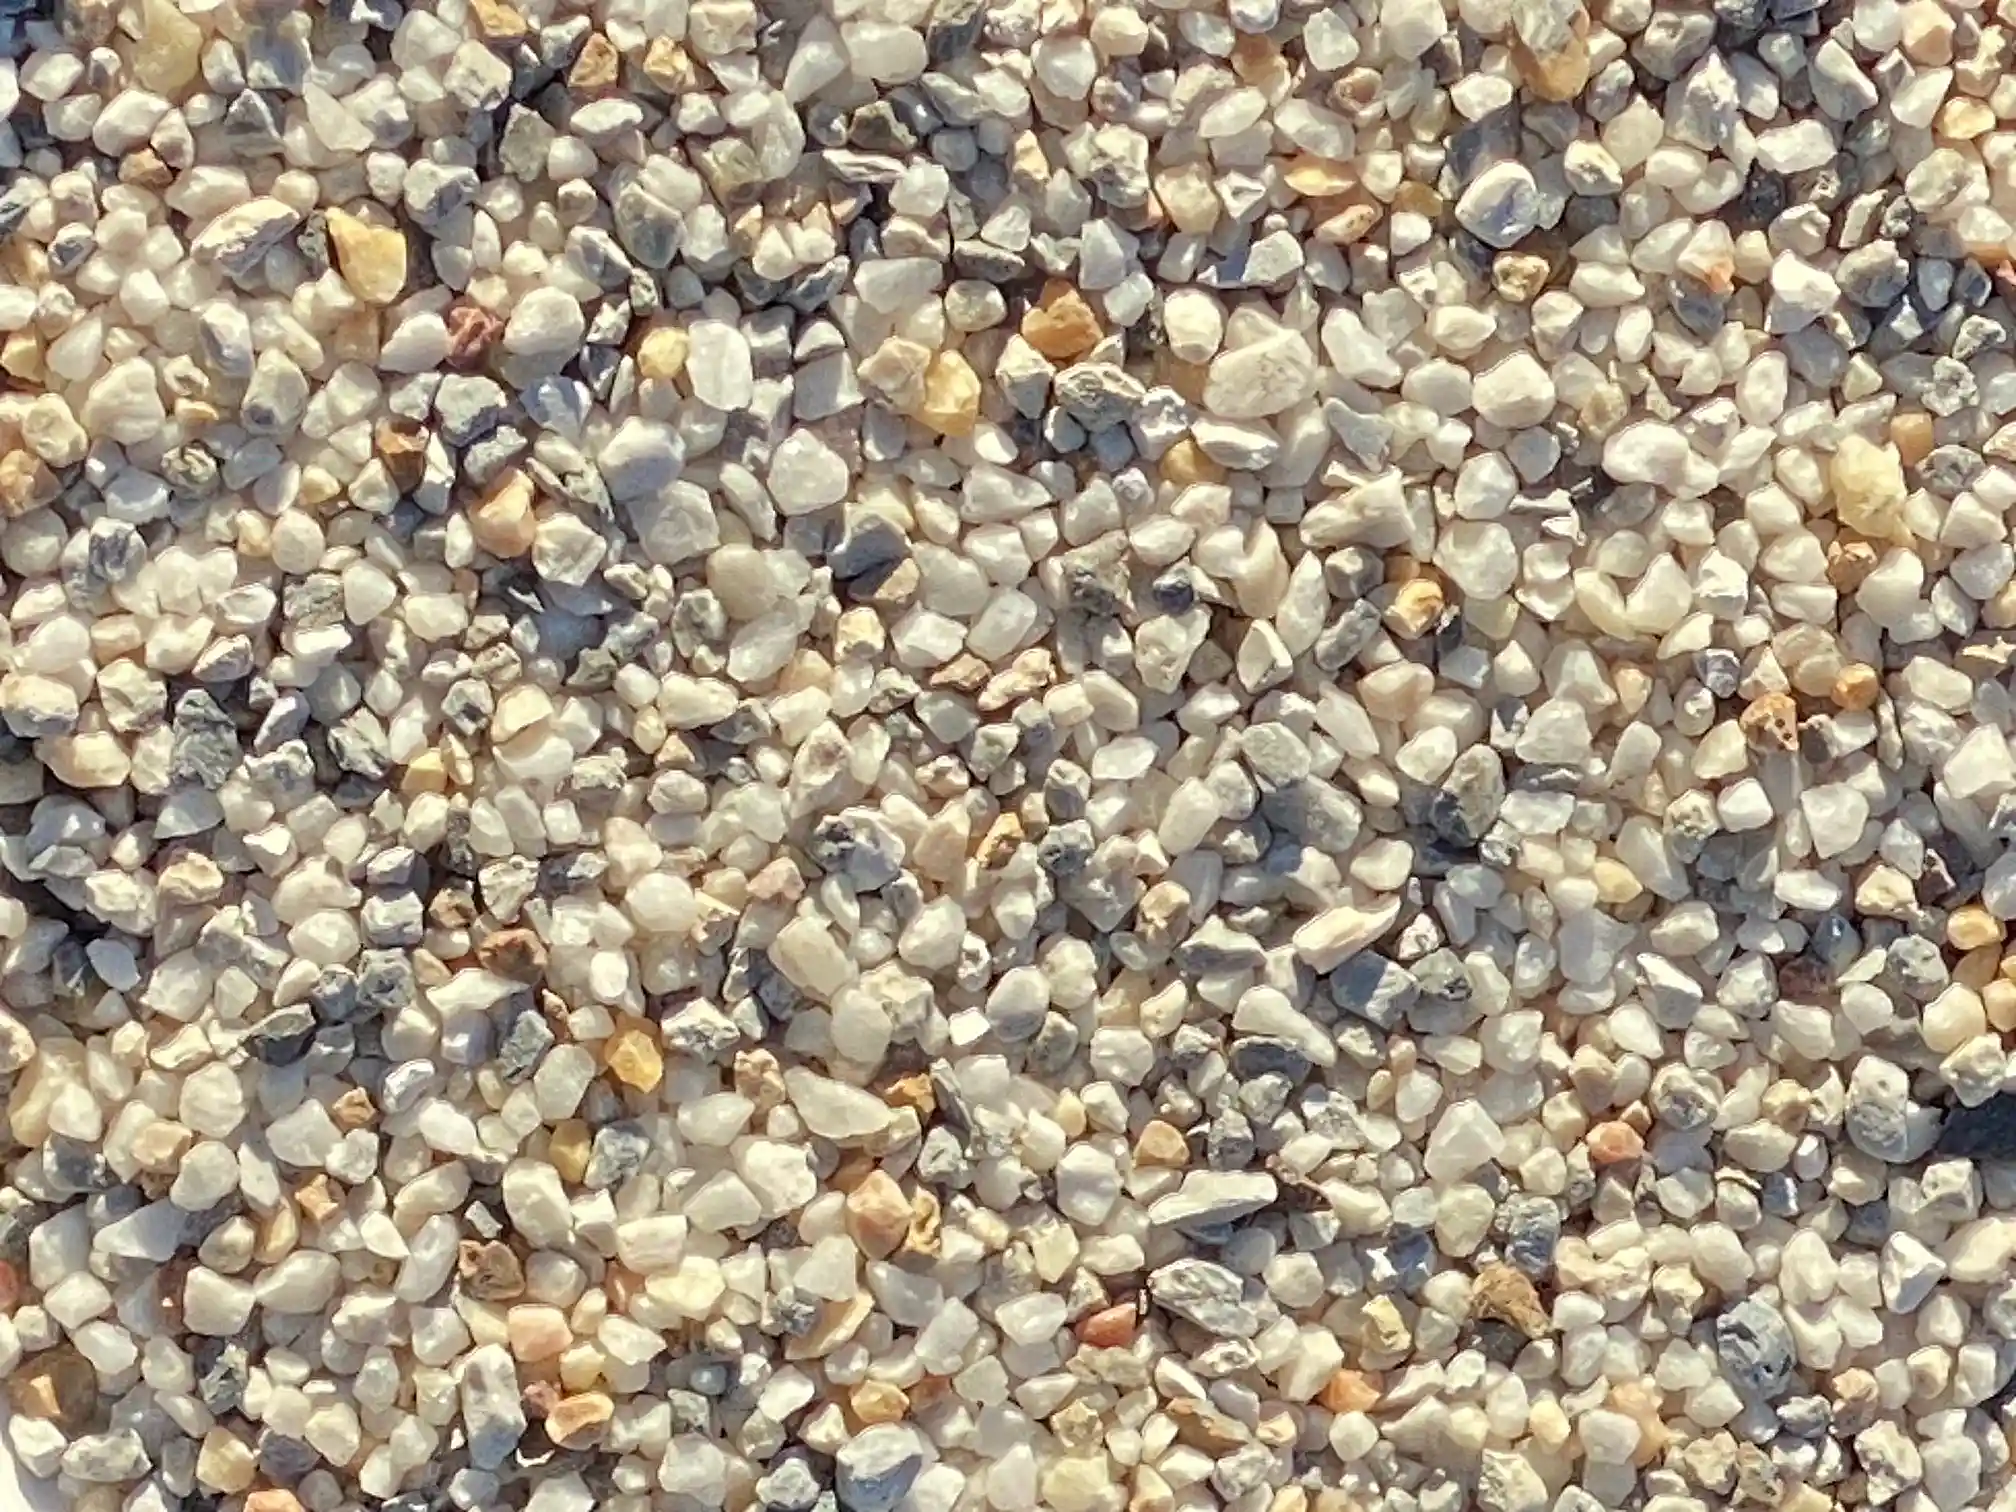 A close-up view of 6 10 White Pool Pebble.